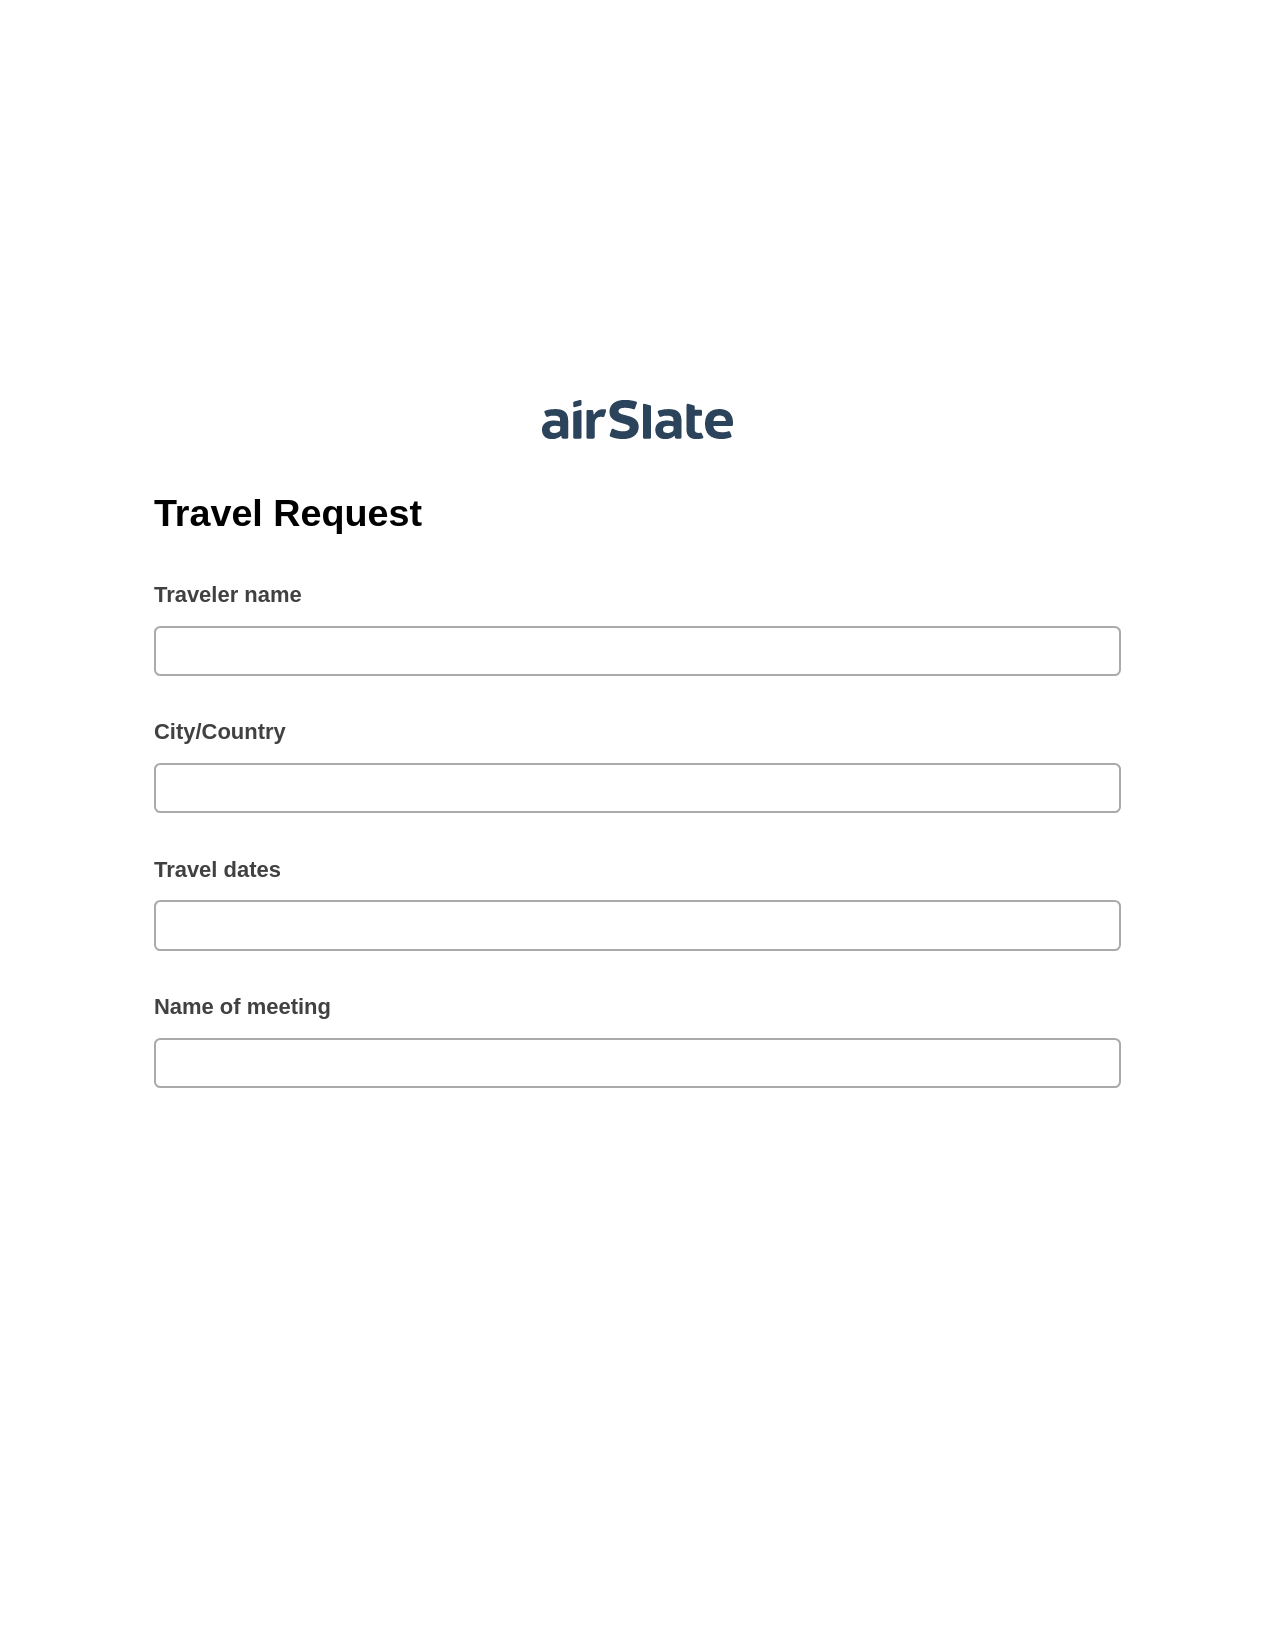 Travel Request Pre-fill from another Slate Bot, Roles Reminder Bot, Export to Smartsheet